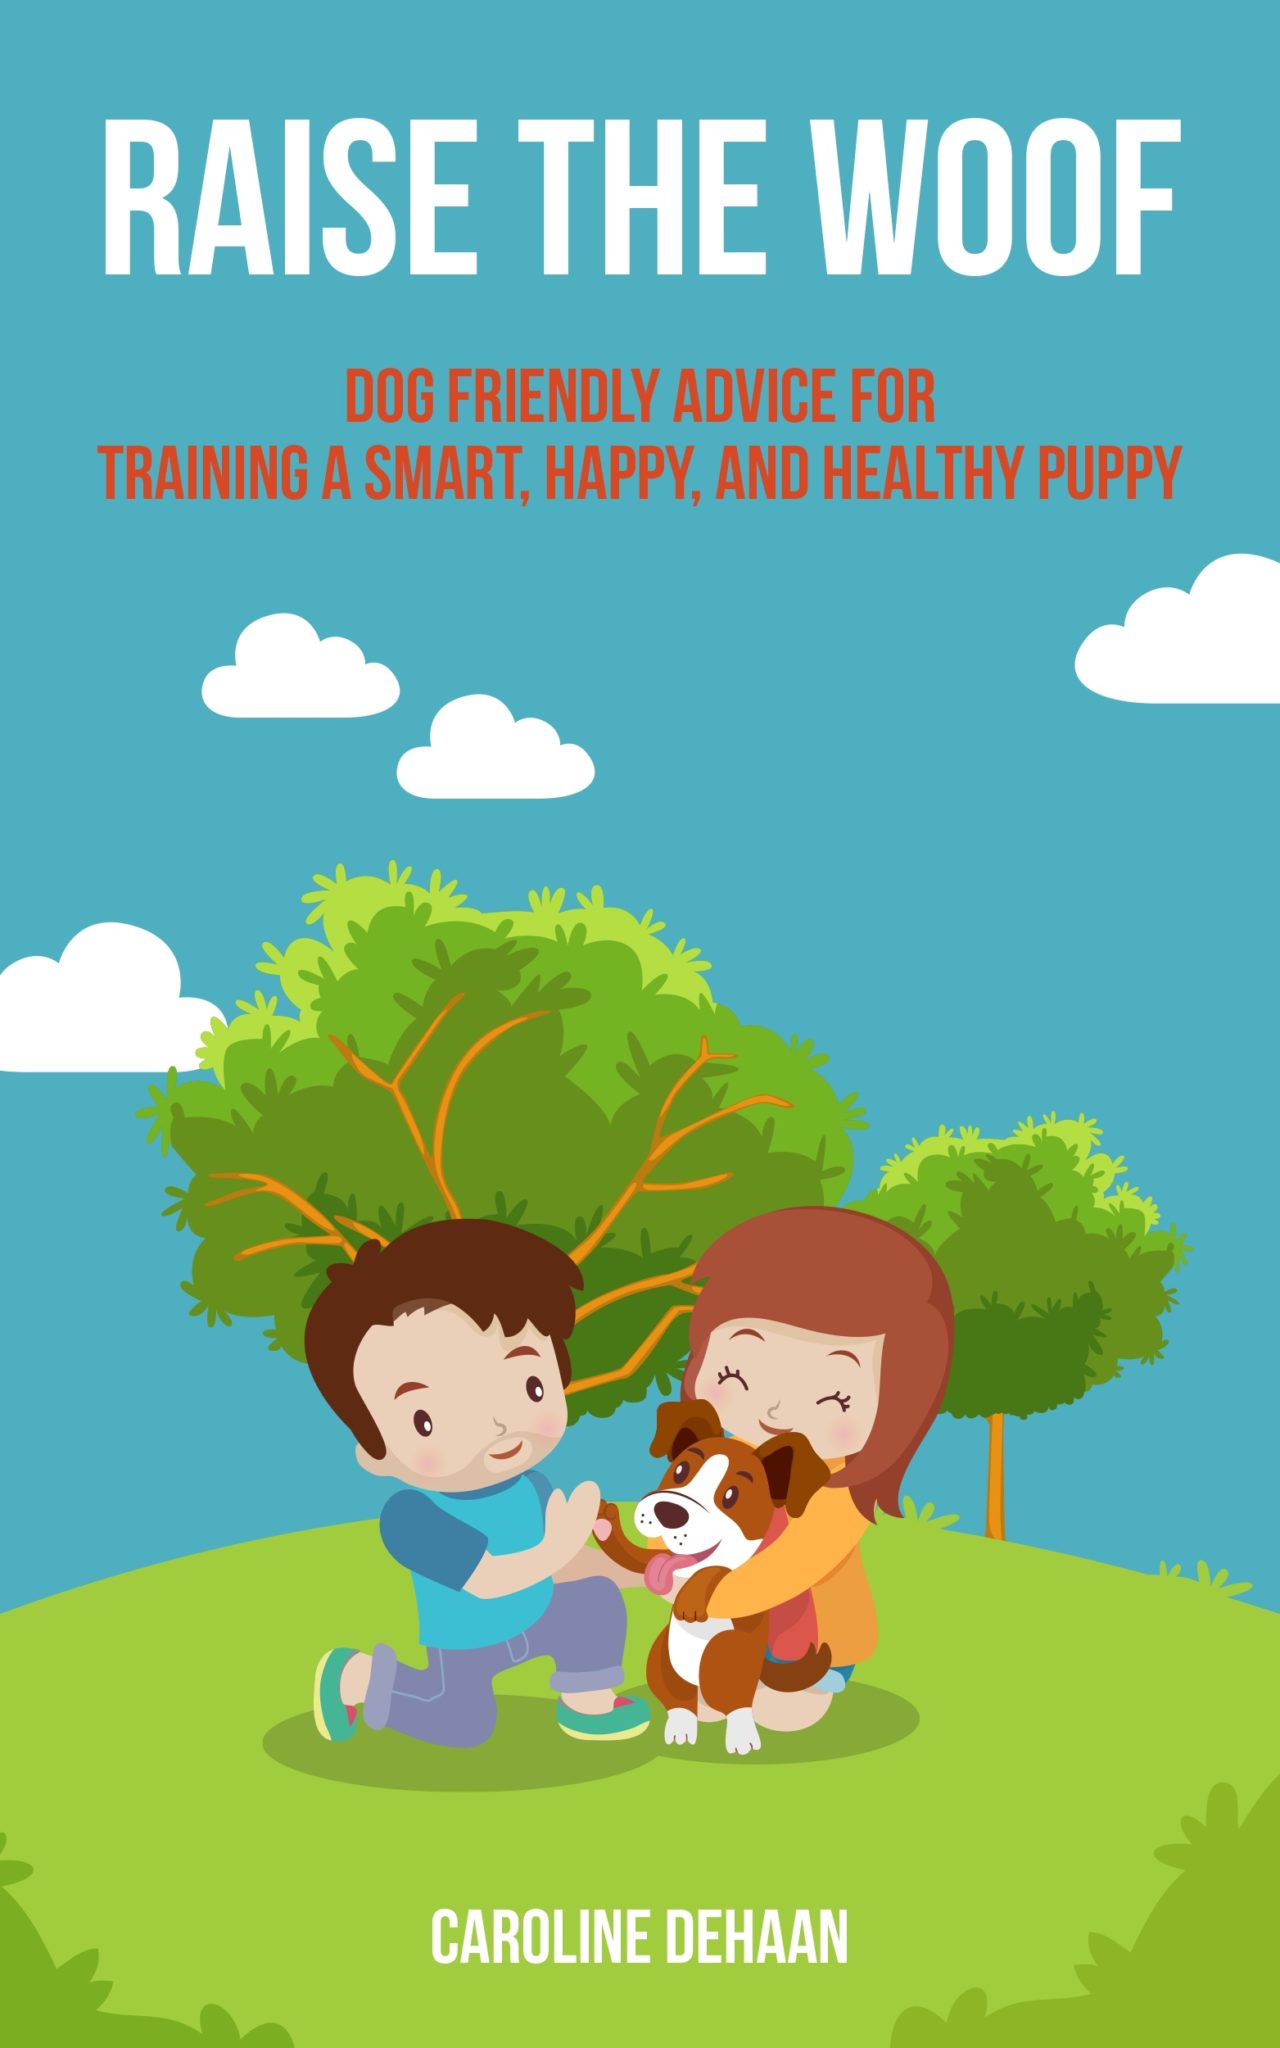 Dog Friendly Advice for Training a Smart, Happy, and Healthy Puppy by Caroline DeHaan